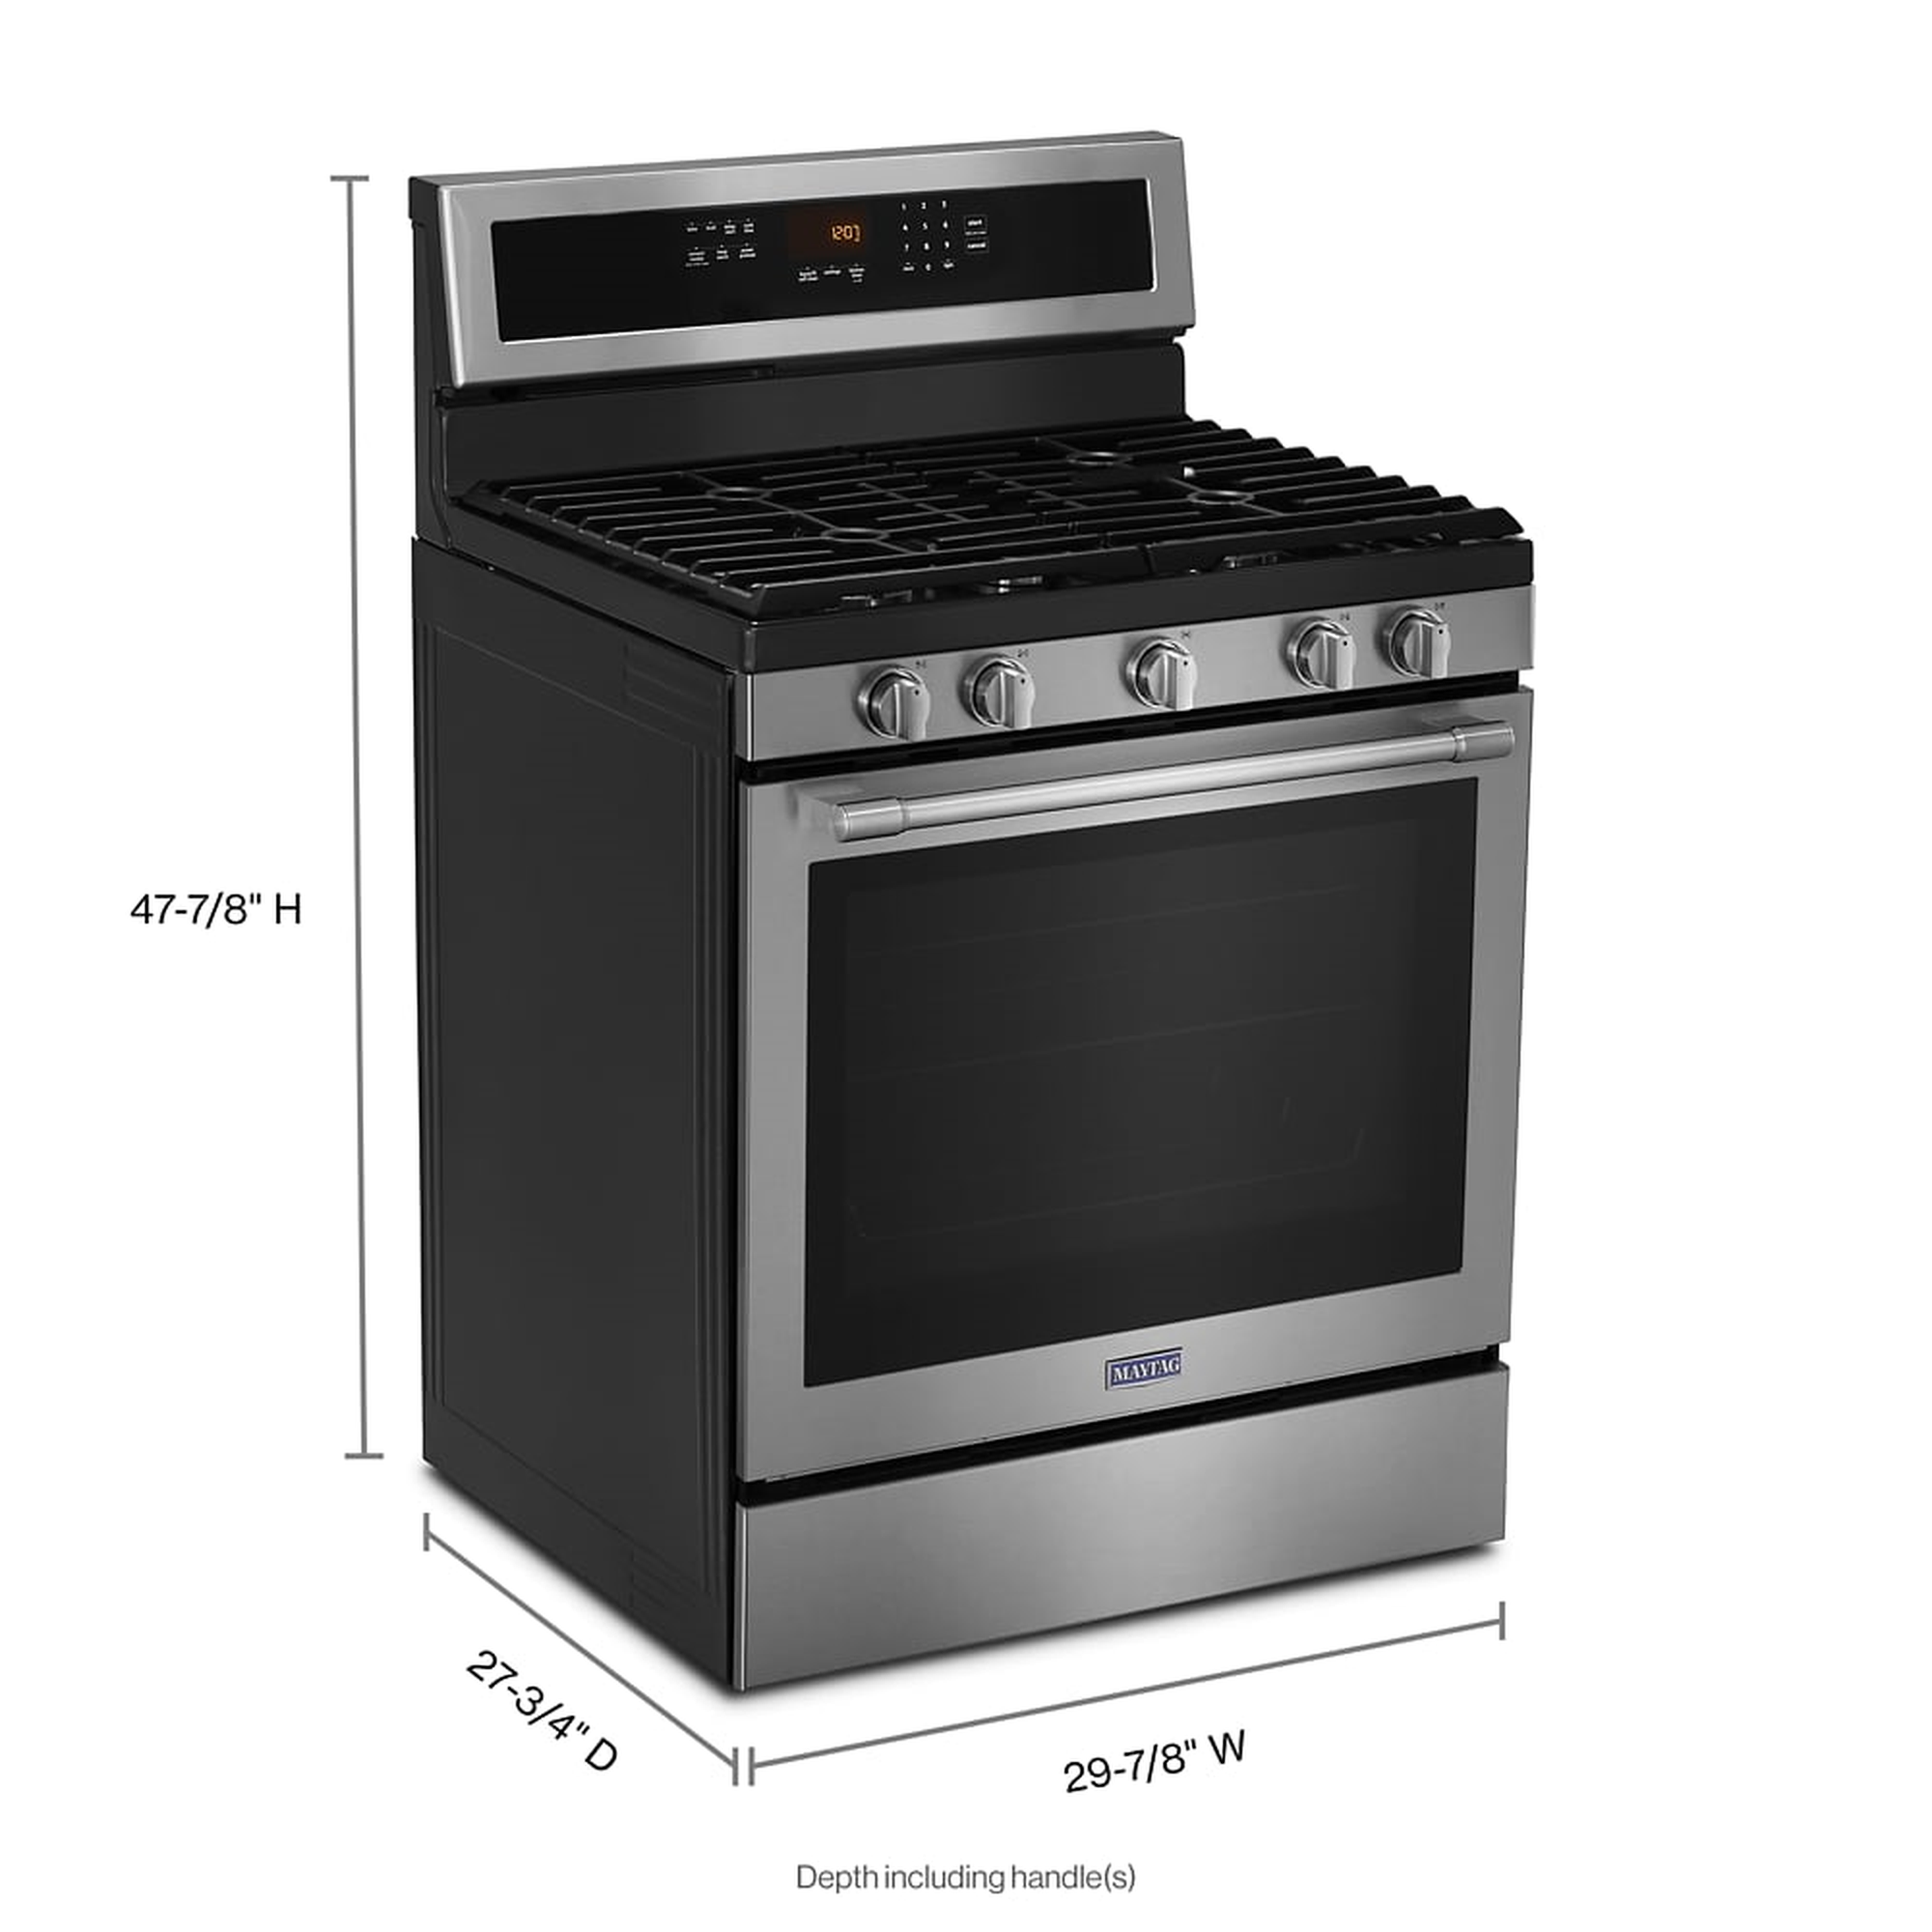 Maytag 30-inch Freestanding Gas Range with True Convection Technology